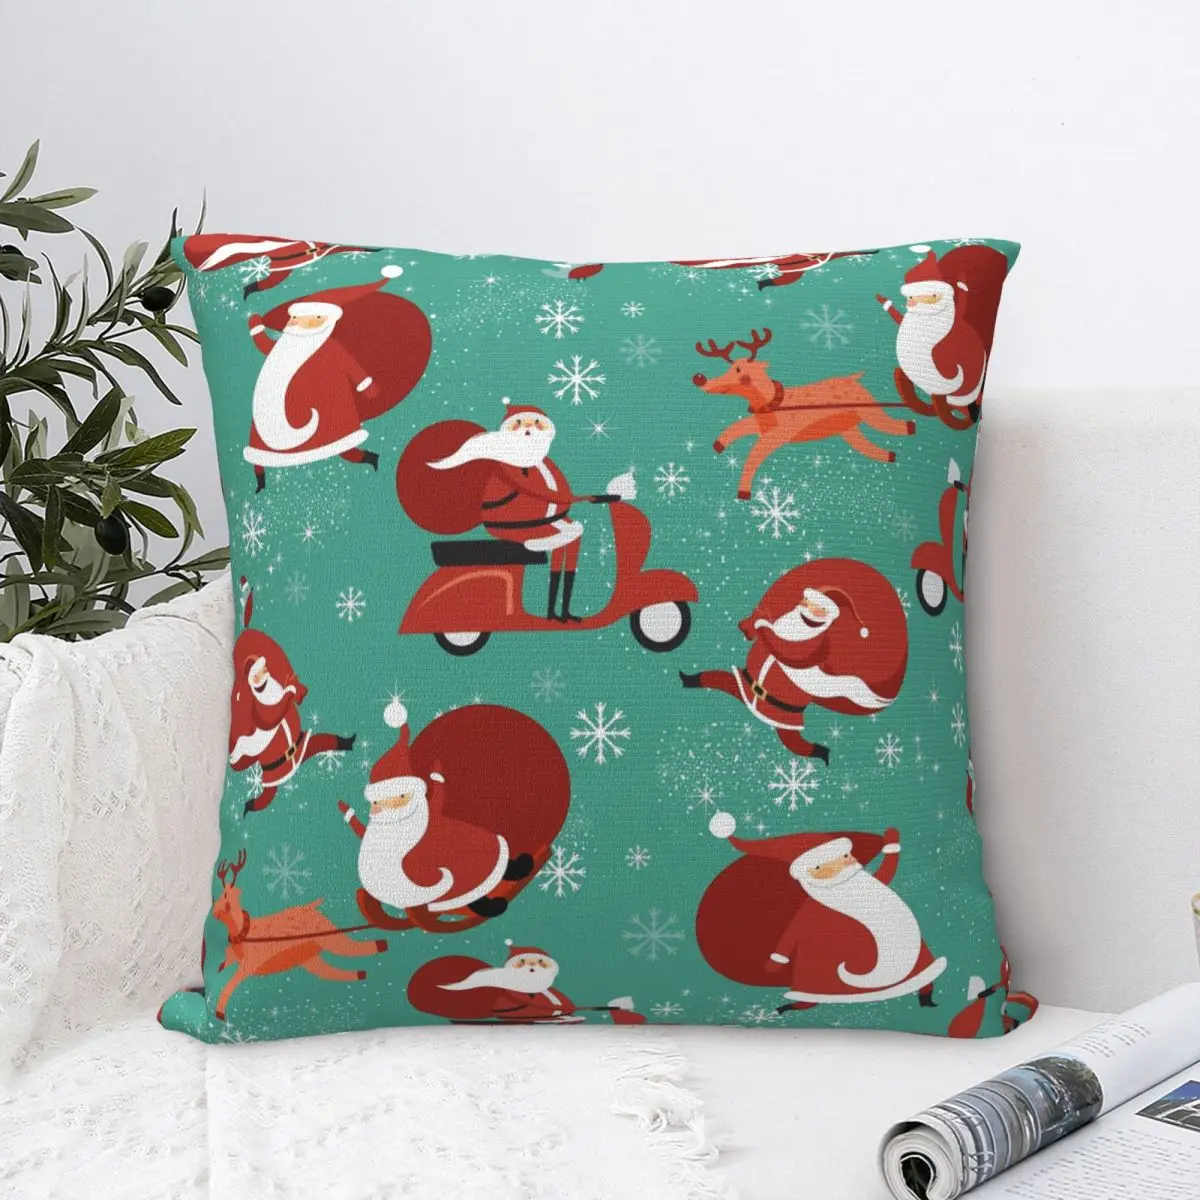 Gift Giving Throw Pillow Case Christmas An Important Christian Festival Commemorating The Birth Of Jesus Christ Cushions